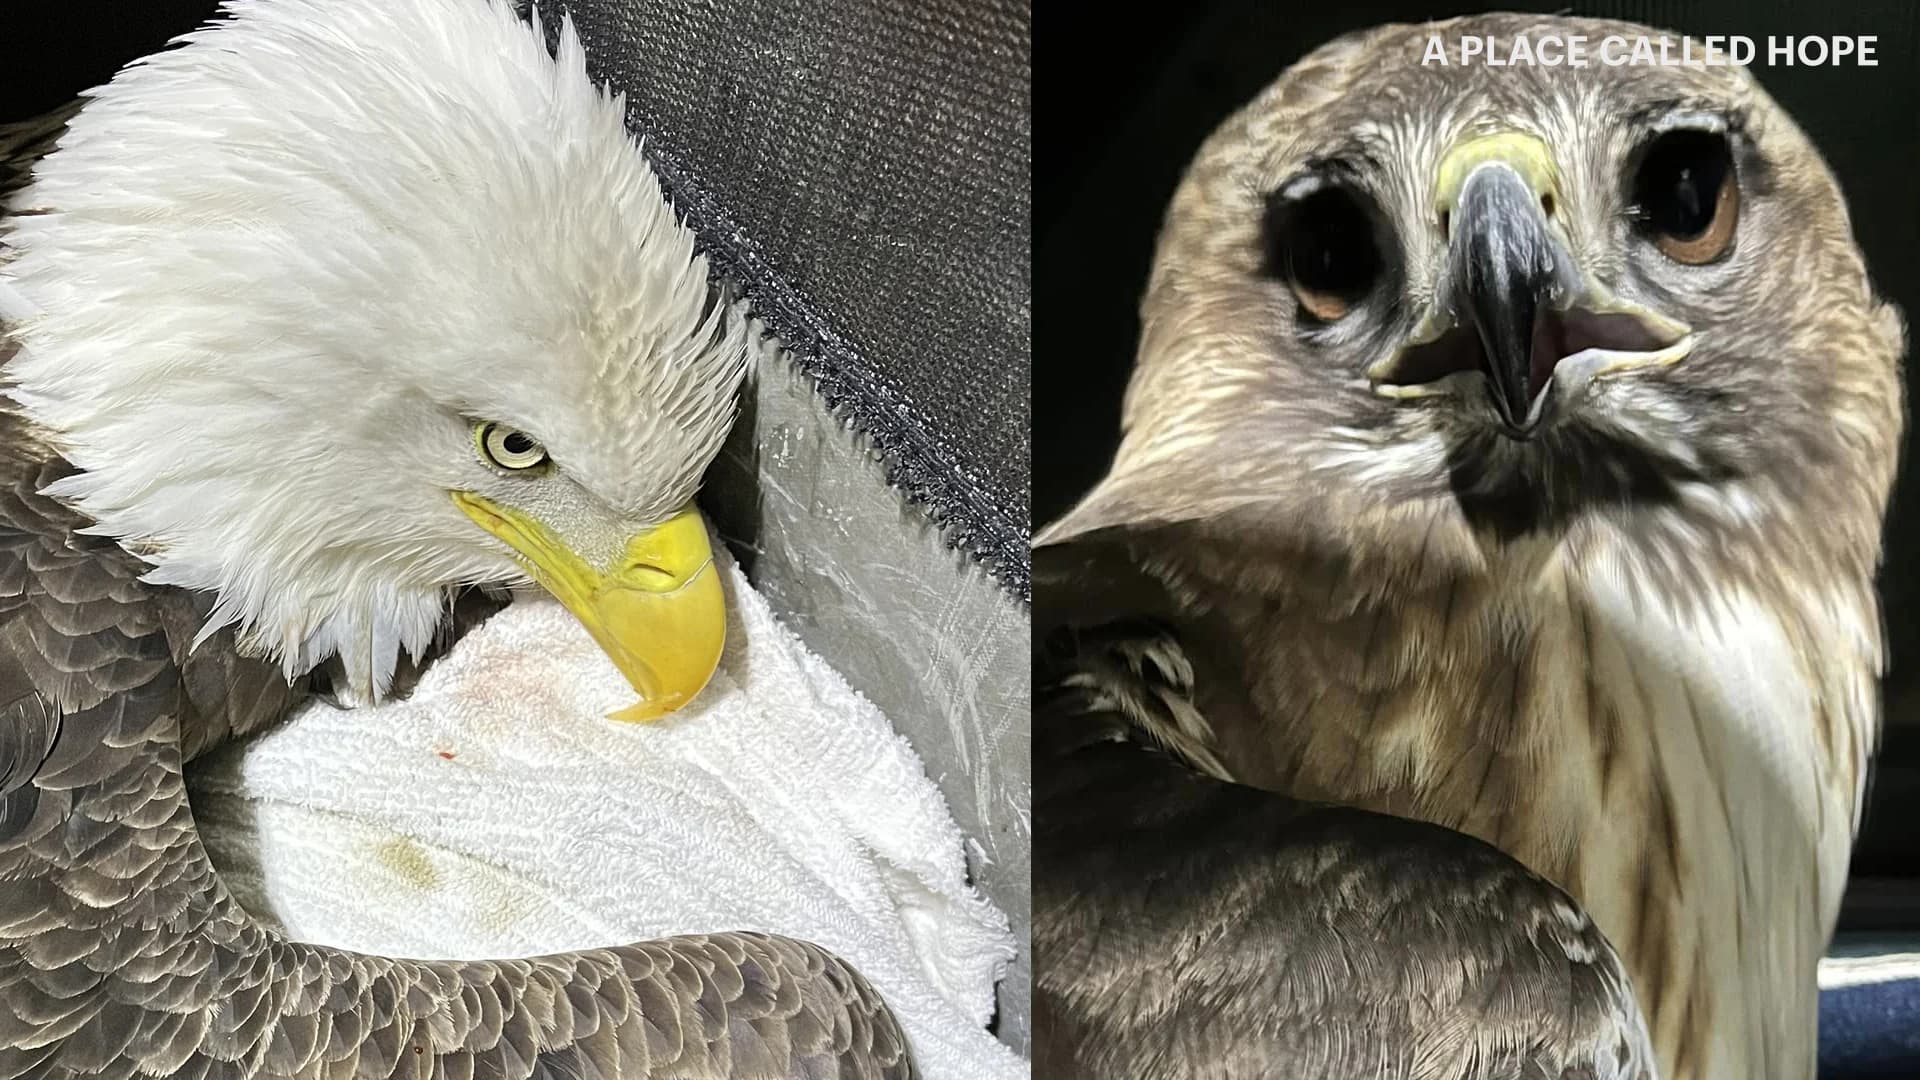 Bird rehab center calls for ban on rodent poisons after bald eagle dies, red-tailed hawk sickened